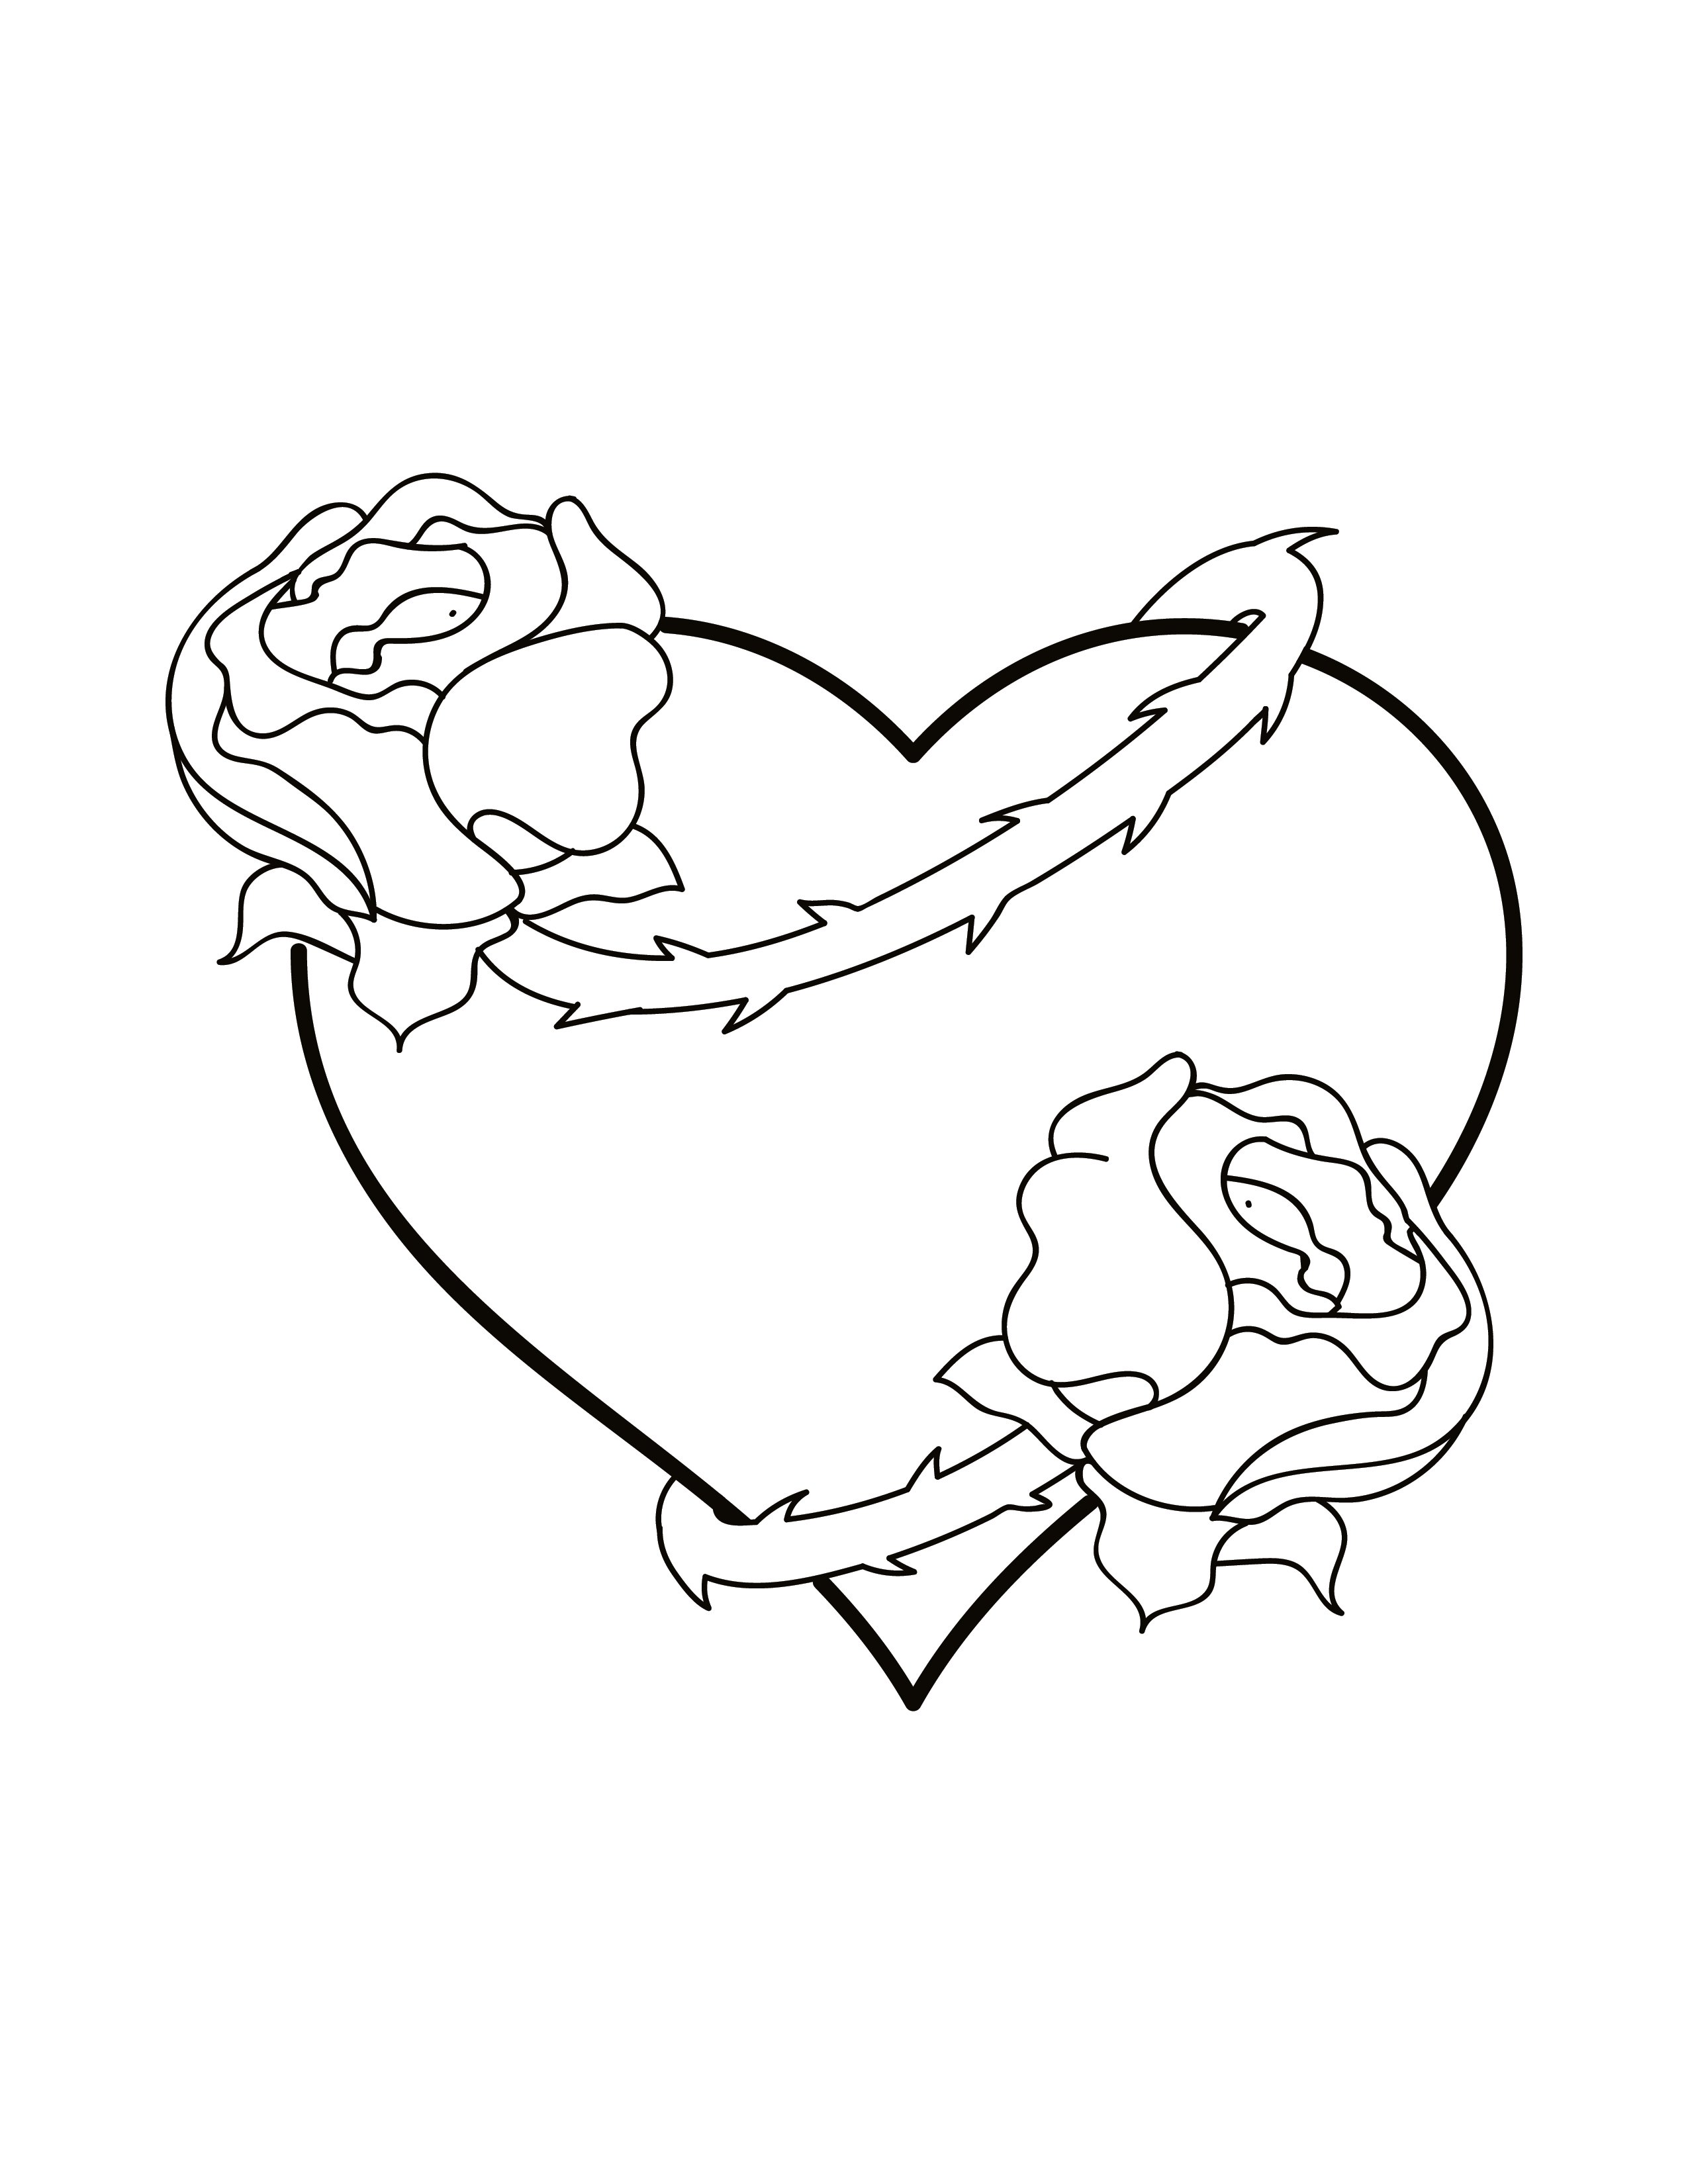 FREE Heart Shaped Rose Coloring Page in EPS, Illustrator, JPG, PNG, PDF ...